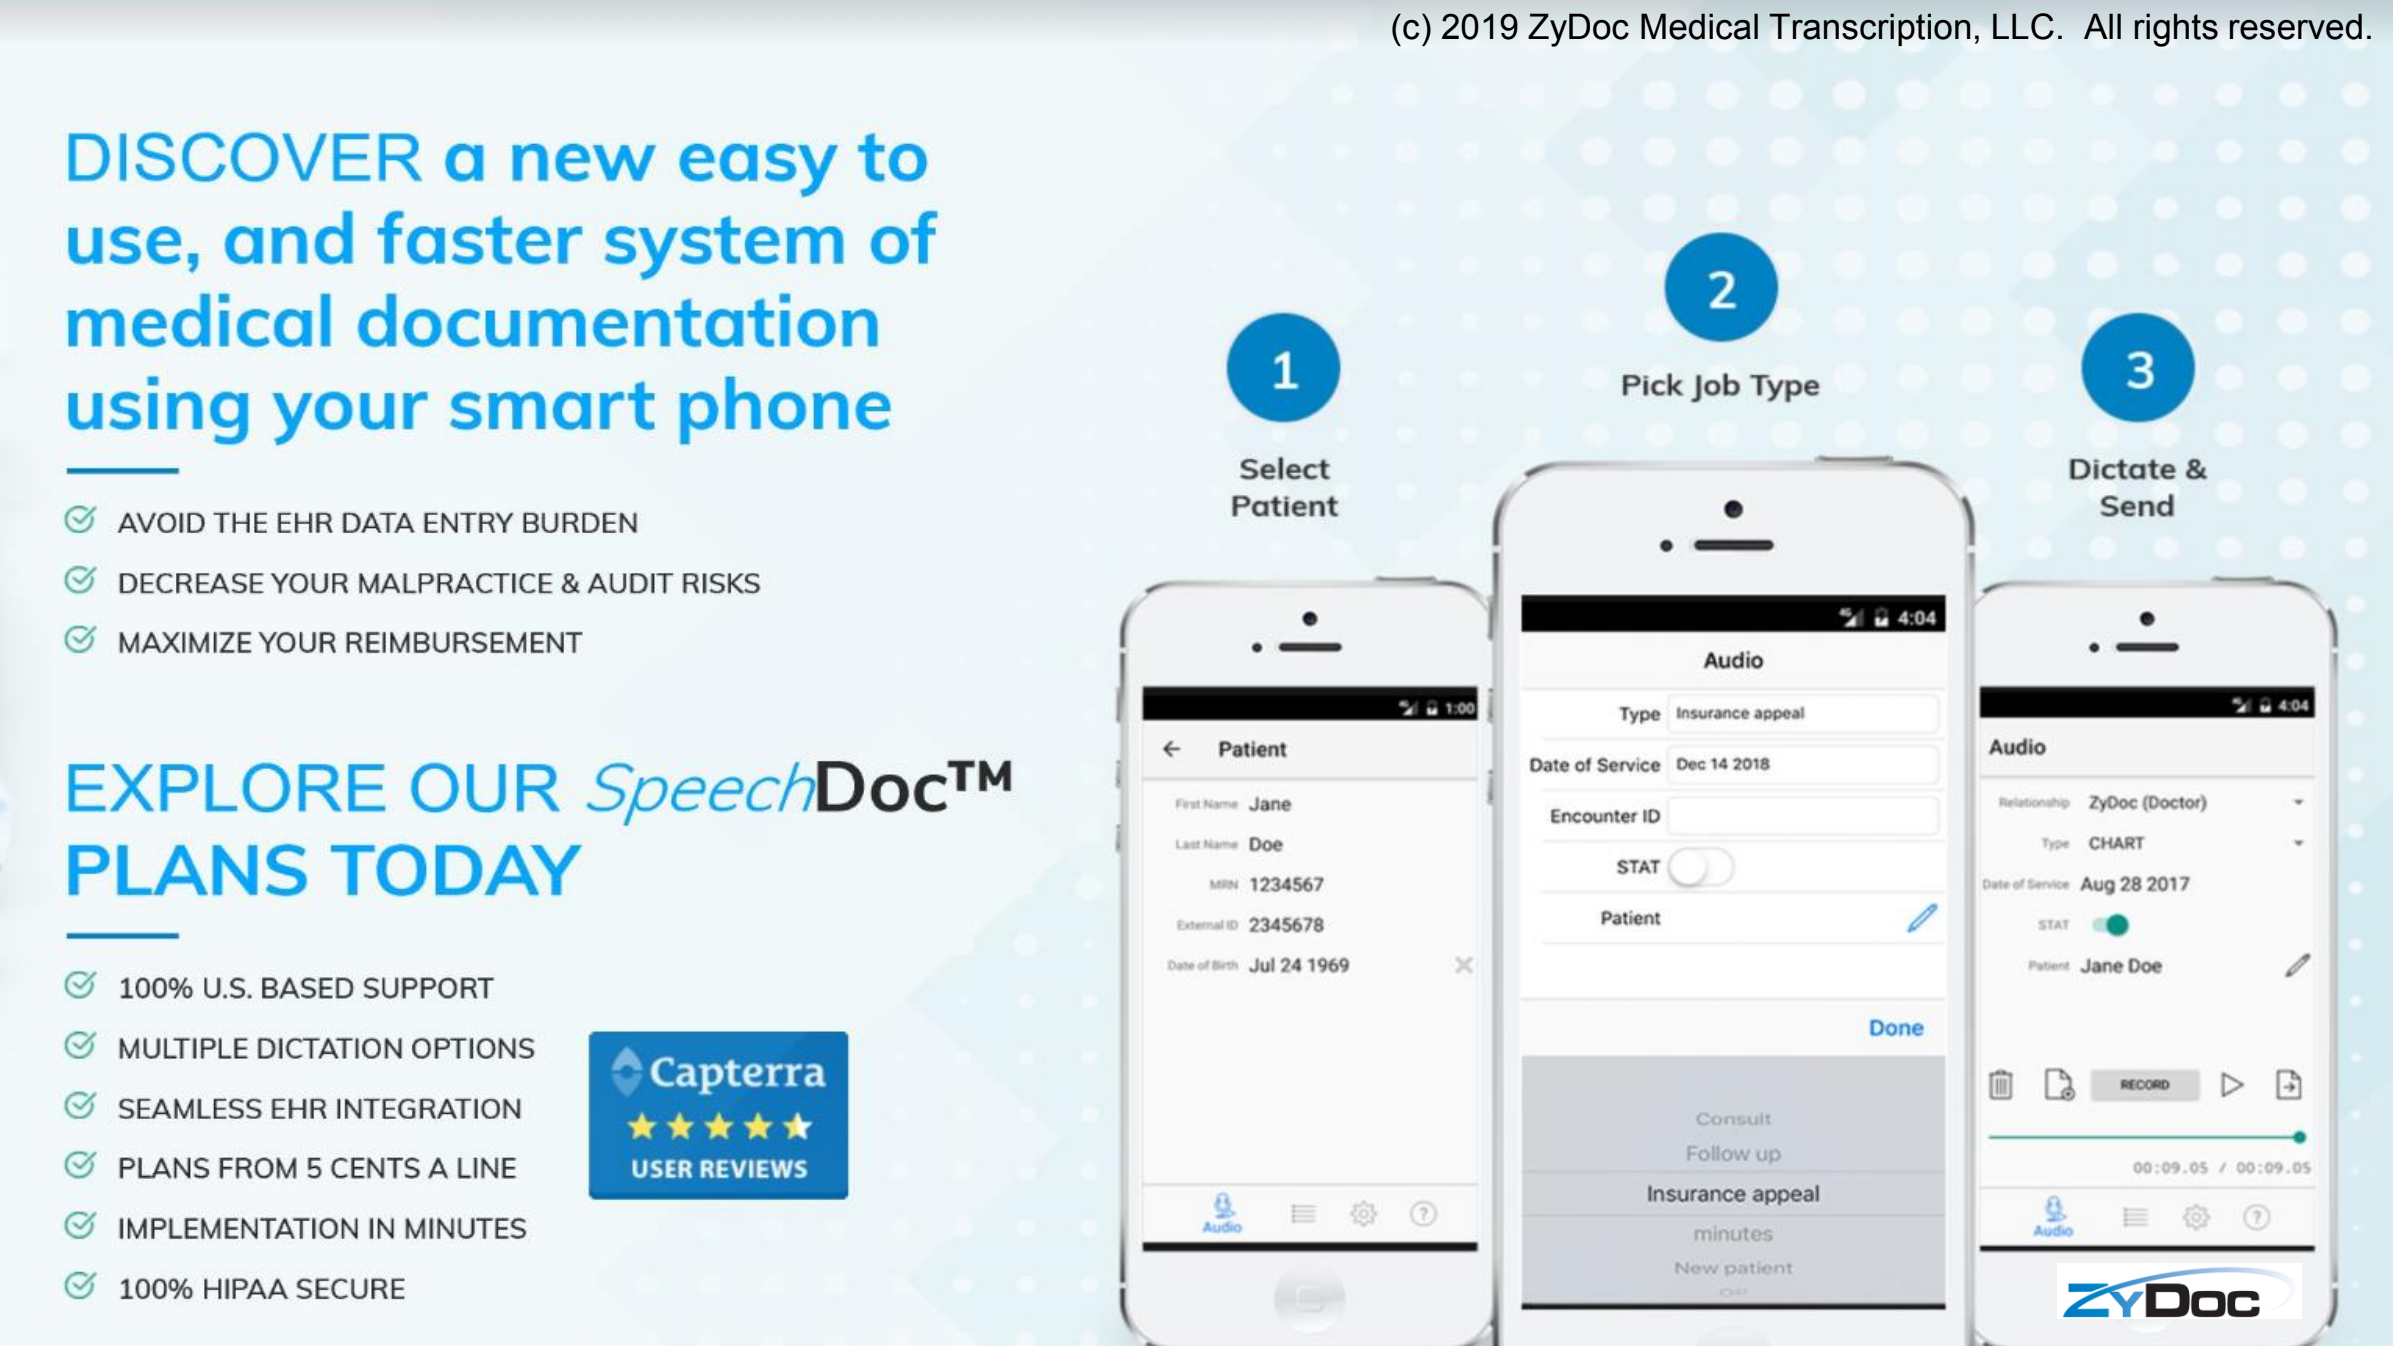 ZyDoc Discover a new,easy to use, and faster system of EHR medical documentation using your smartphone